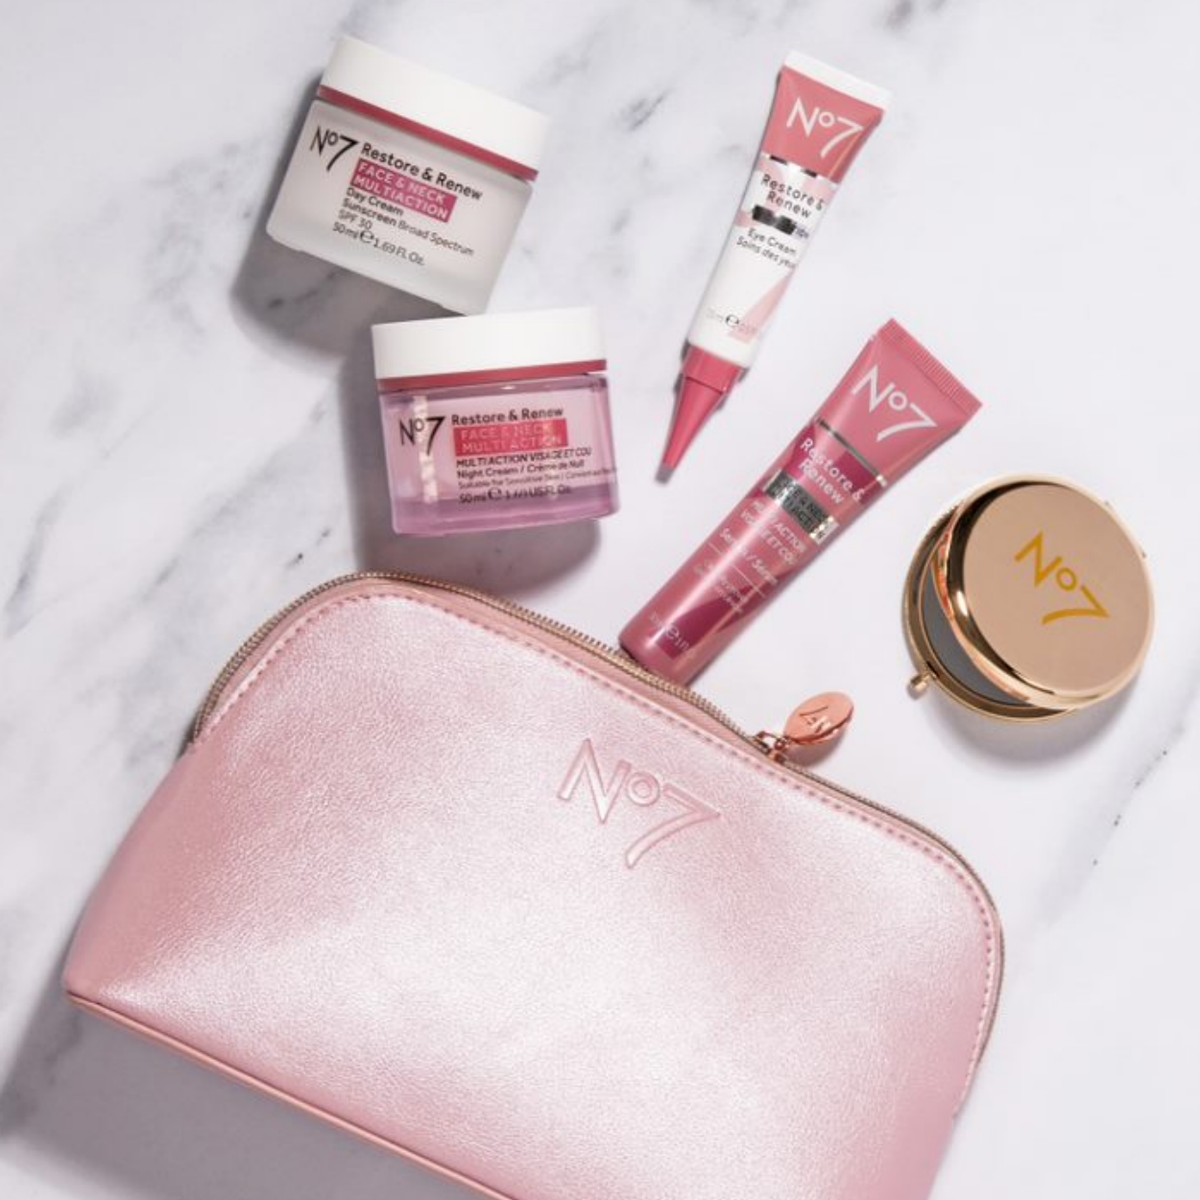 Free Cosmetics Bag when you buy a skincare set